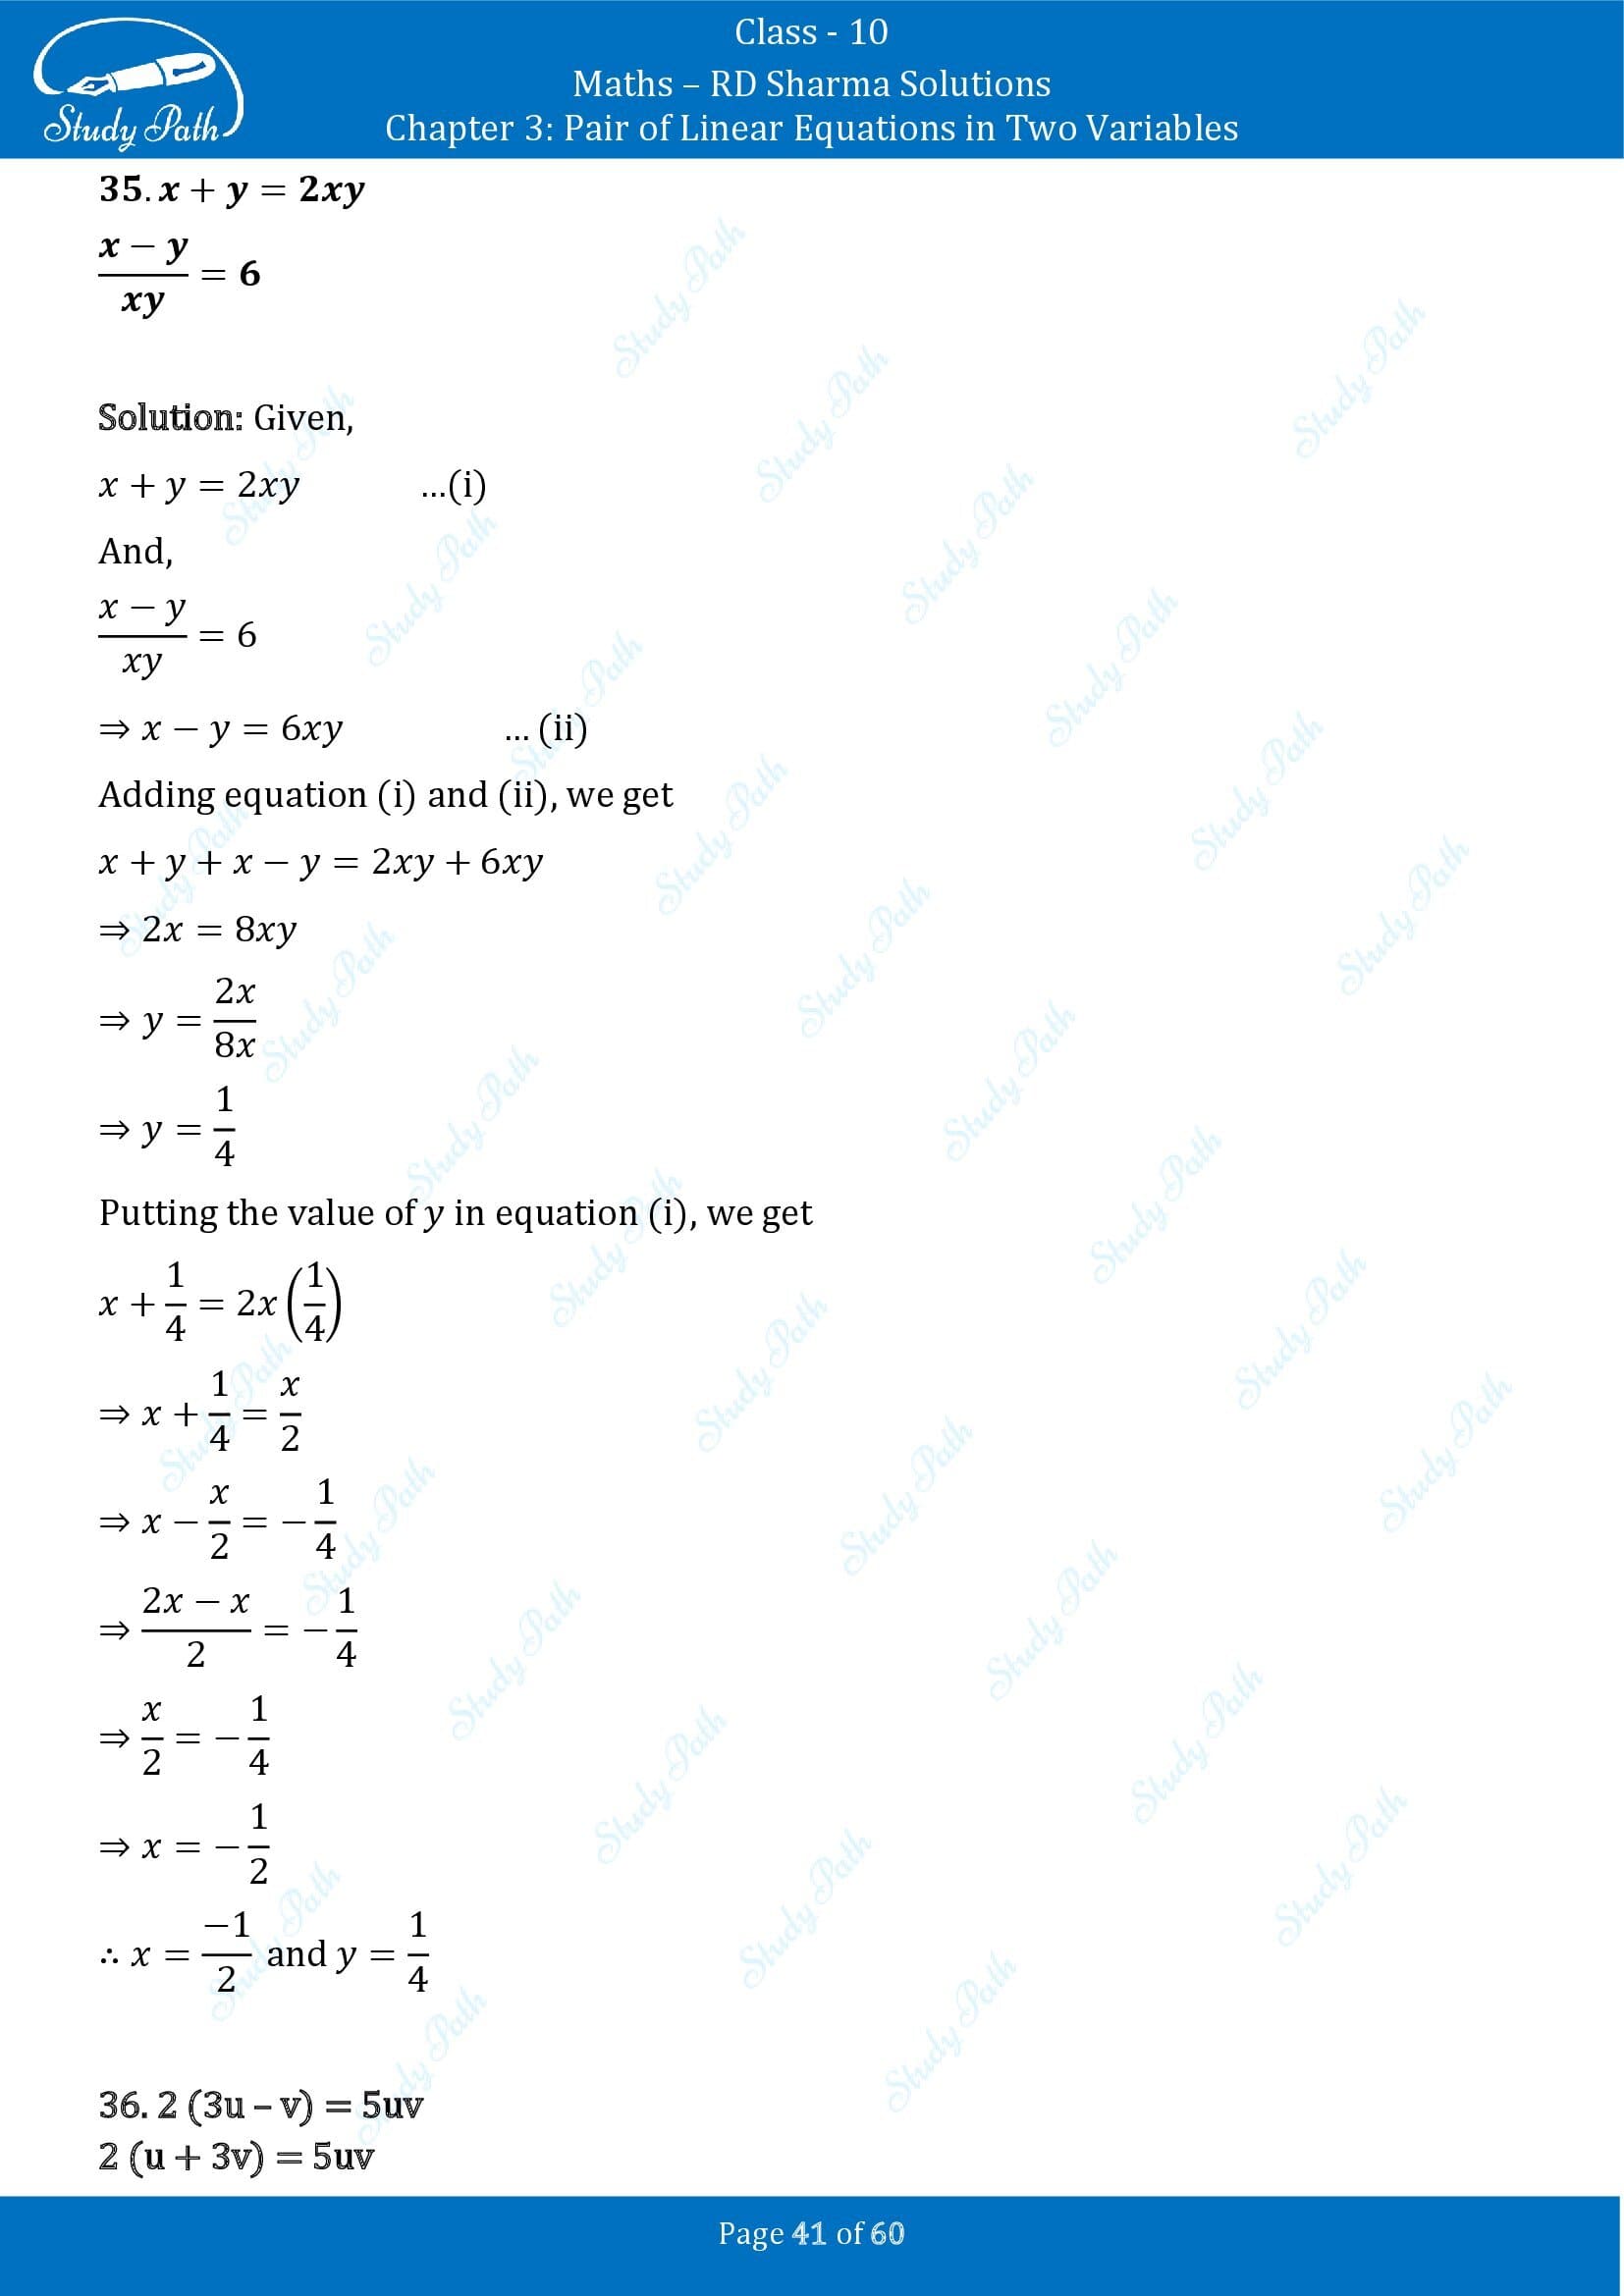 RD Sharma Solutions Class 10 Chapter 3 Pair of Linear Equations in Two Variables Exercise 3.3 00041